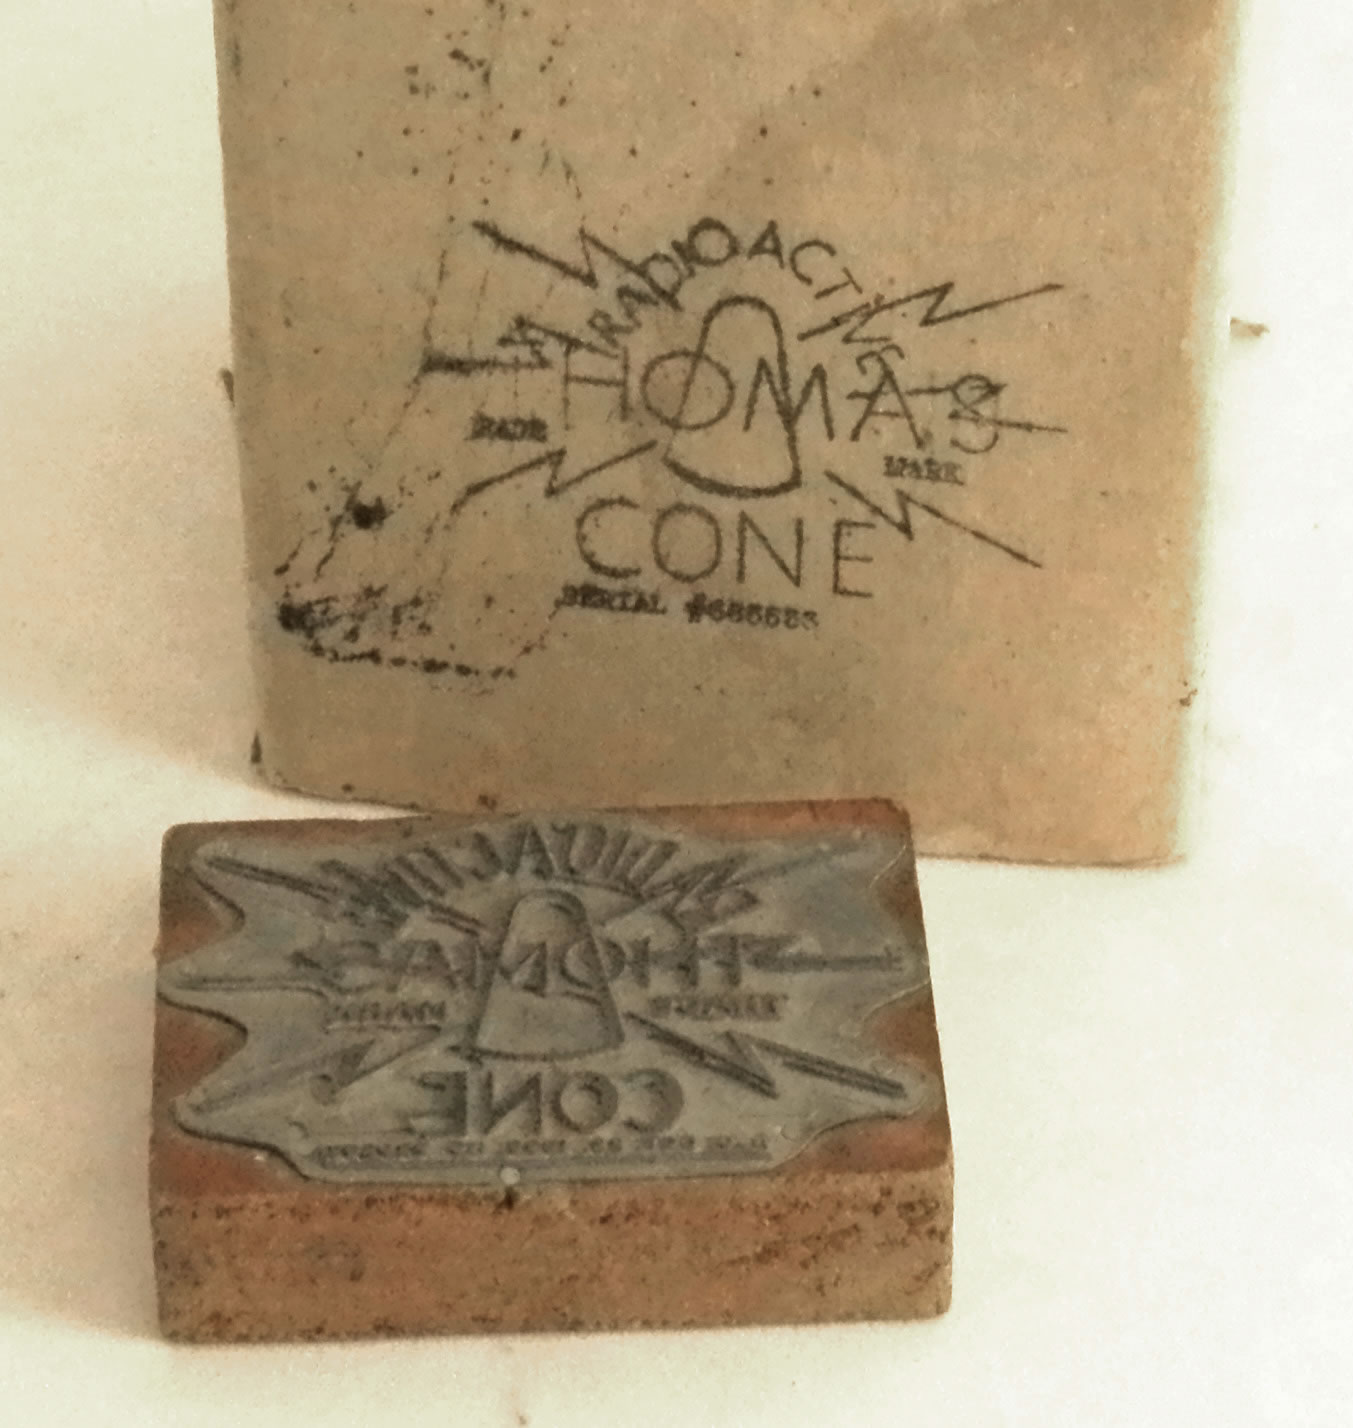 Mold and Stamps for the Thomas Radioactive Cone (ca. 1935-1955)